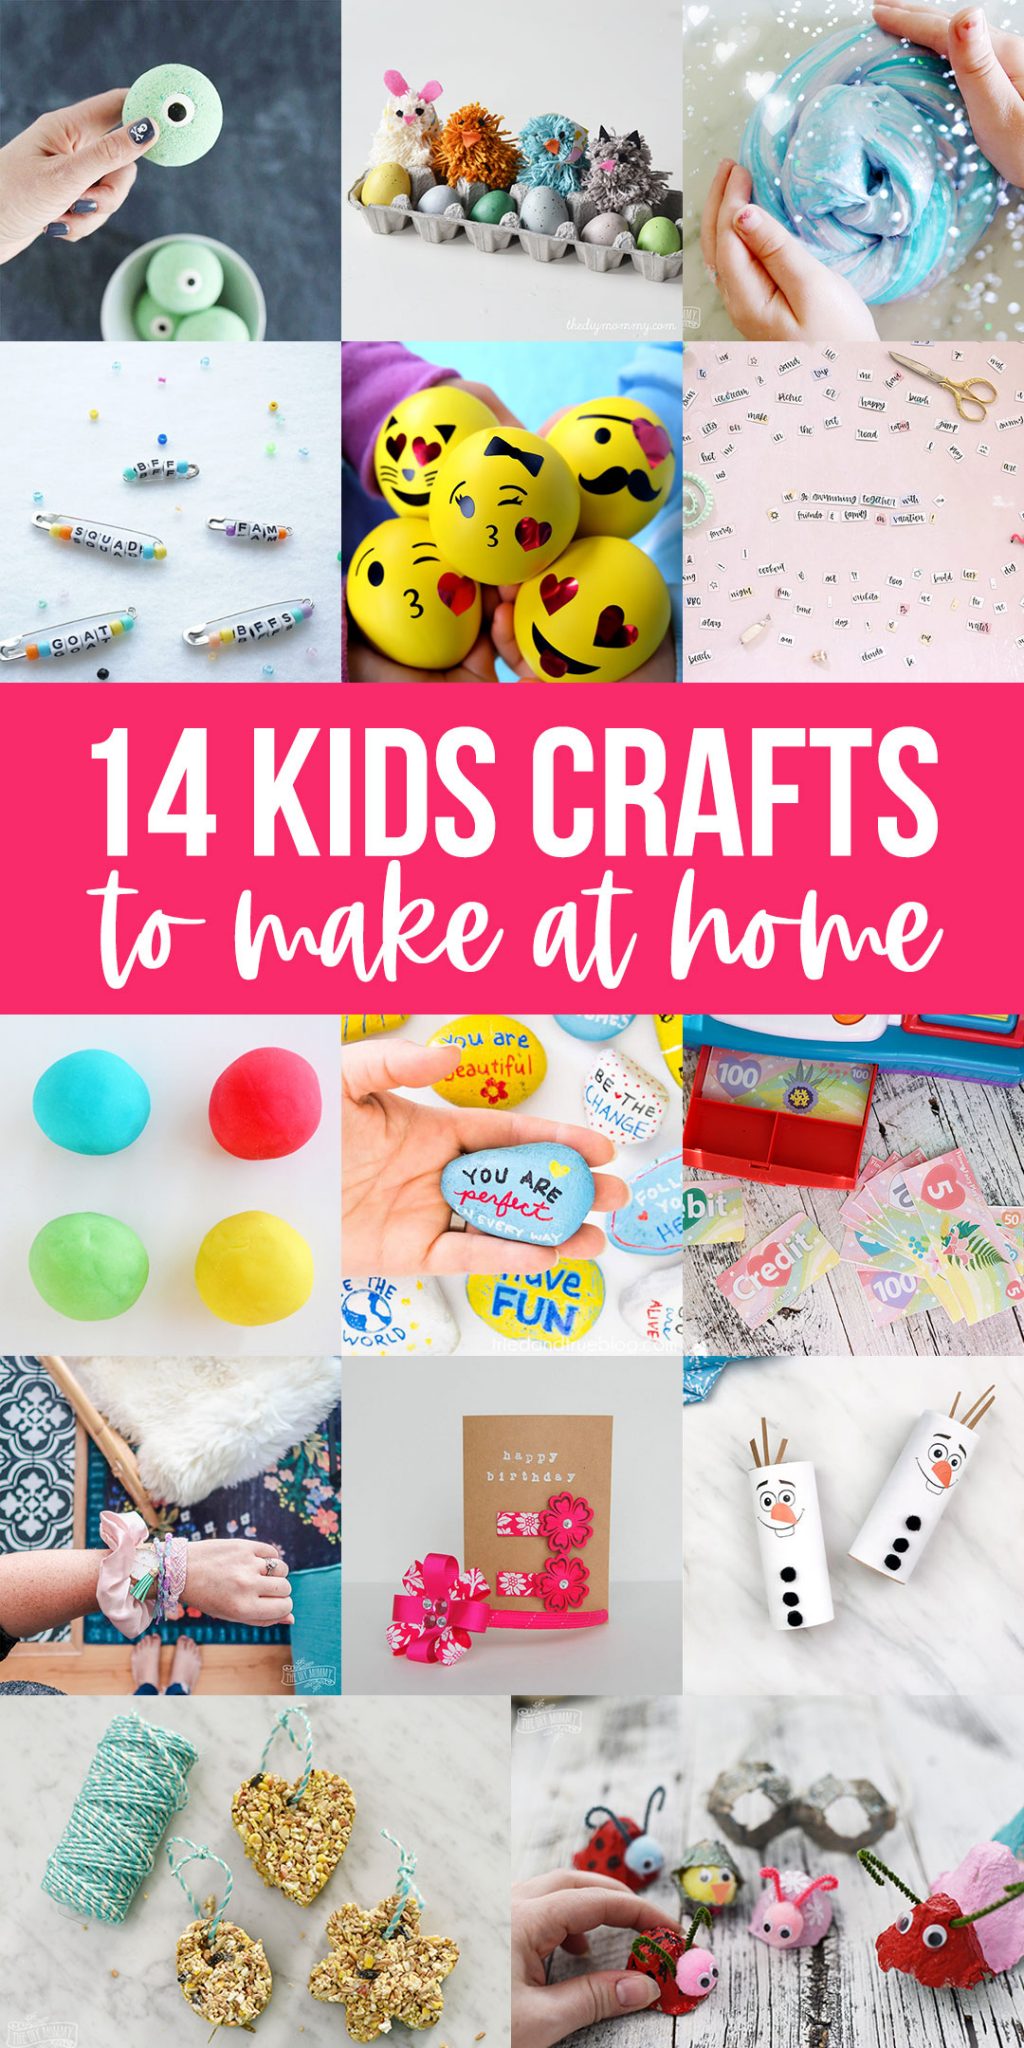 If you're stuck at home due to sickness or school cancellation, these 14 kids crafts are a wonderful way to stay occupied and creative.